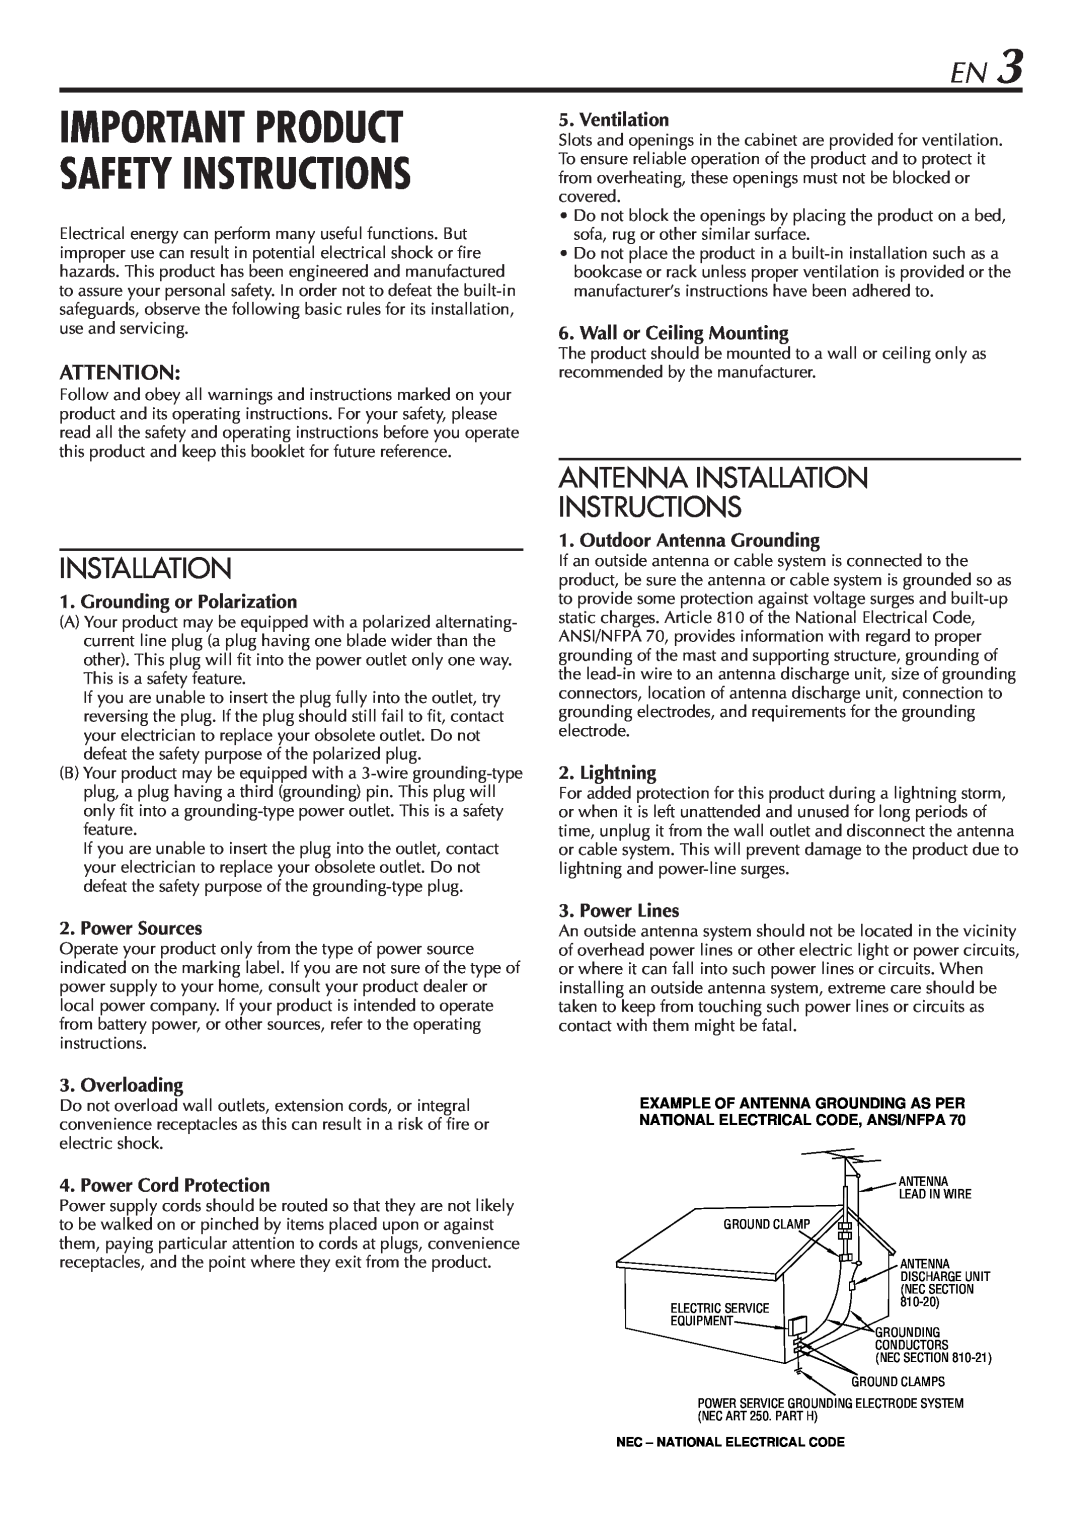 JVC HR-A47U manual Antenna Installation Instructions, Important Product Safety Instructions 